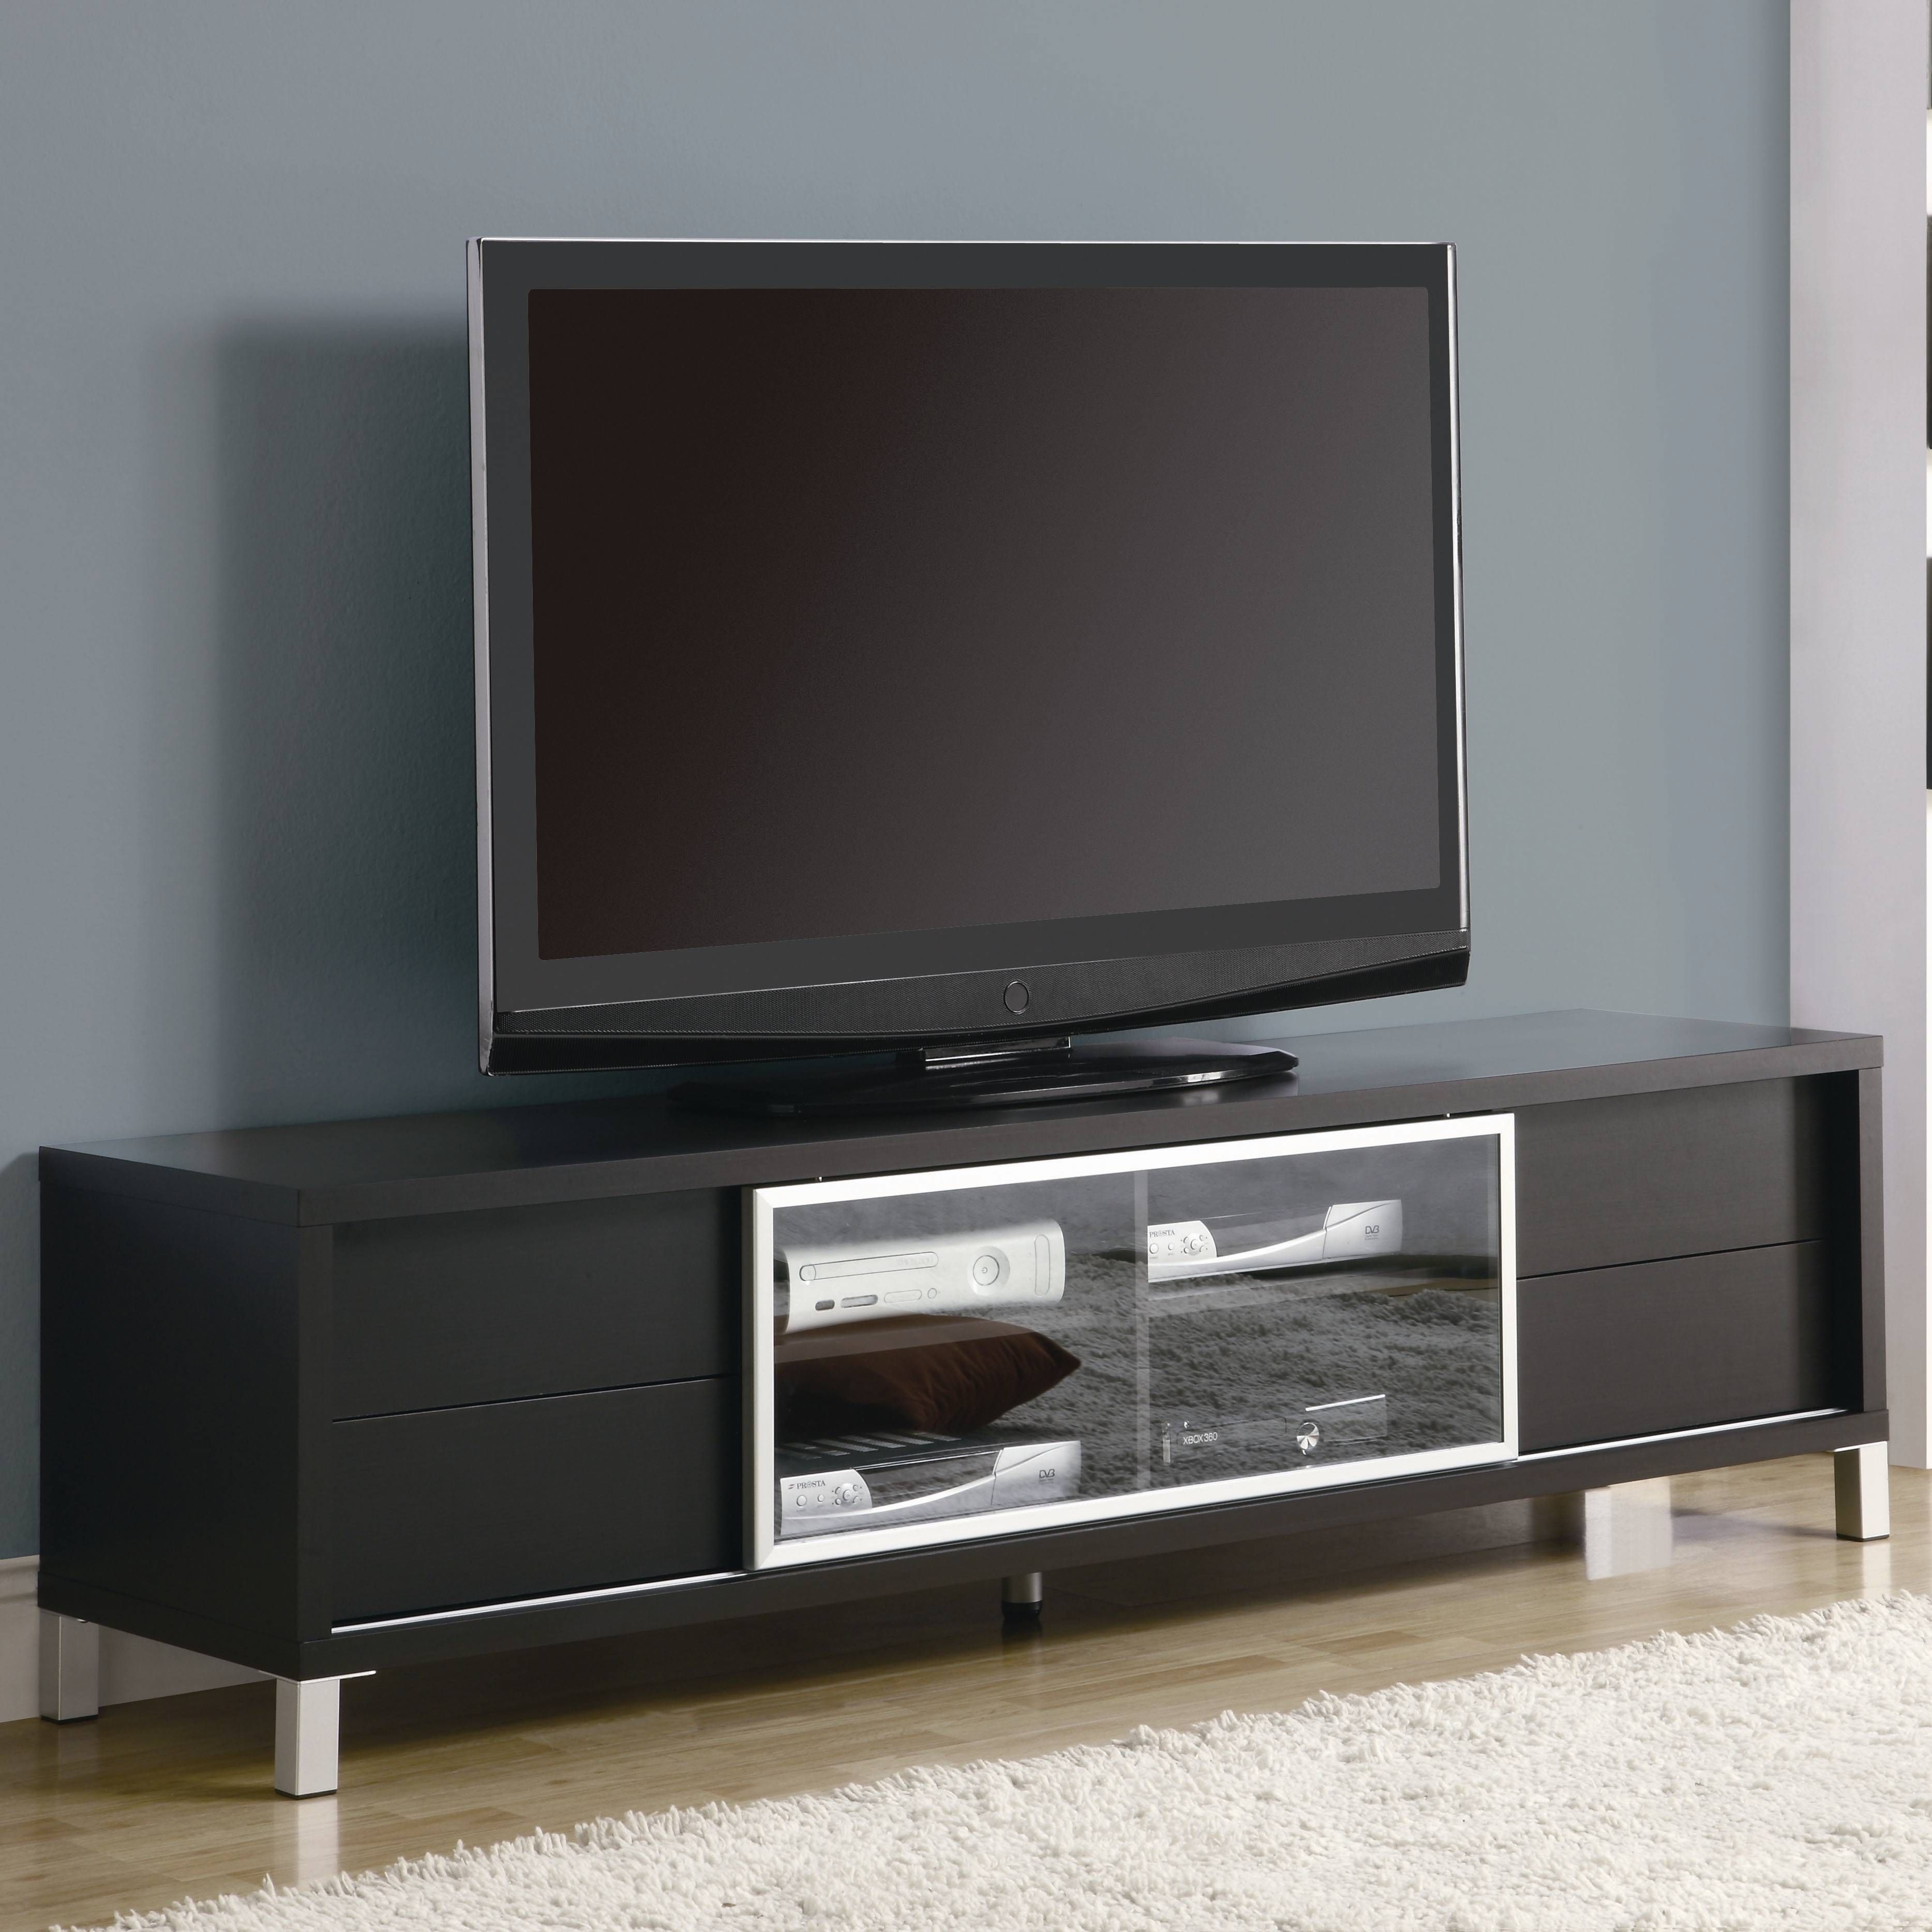 Modern Entertainment Centers Wall Units Allmodern Moda Tv Stand Within All Modern Tv Stands (View 14 of 15)